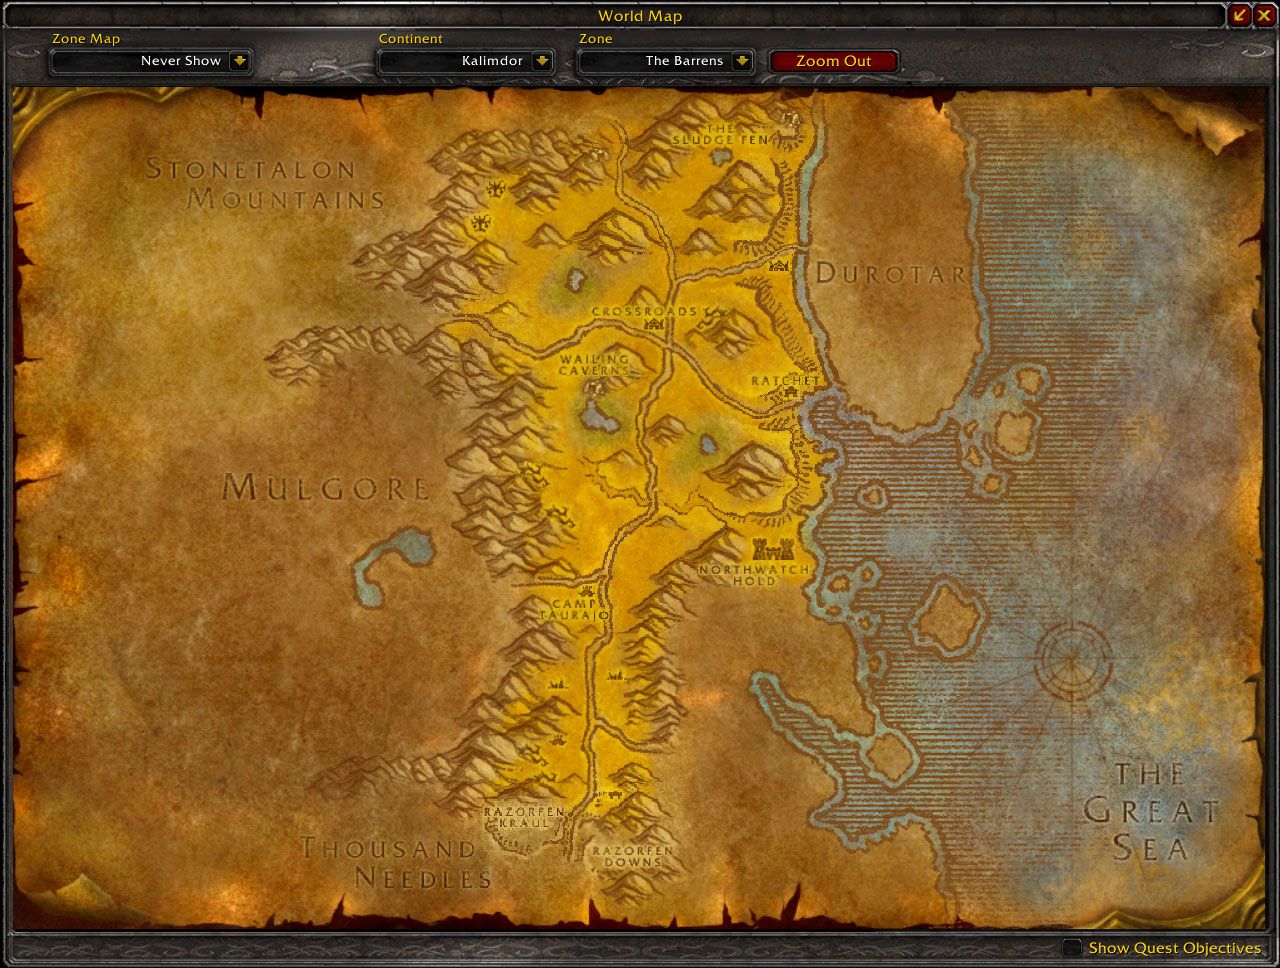 The Barrens map wow